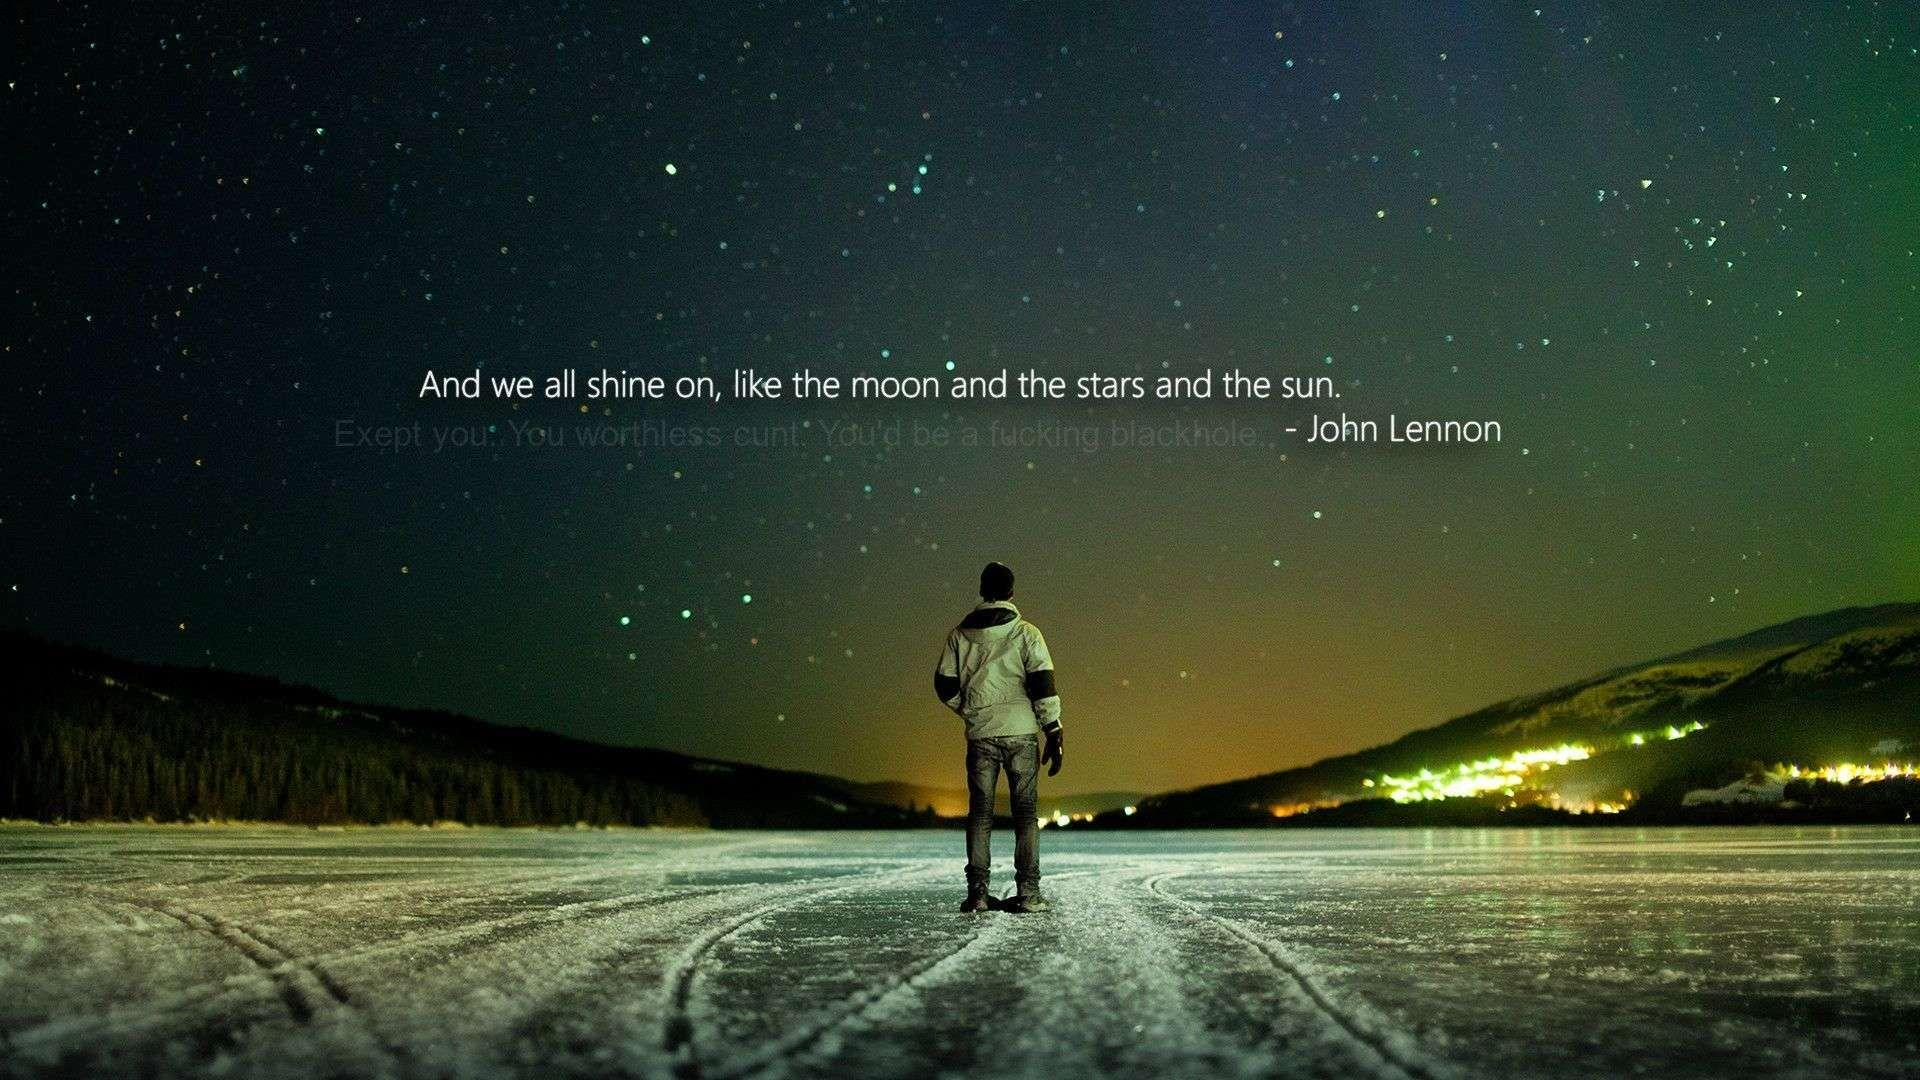 Quotes Space Wallpapers - Top Free Quotes Space Backgrounds